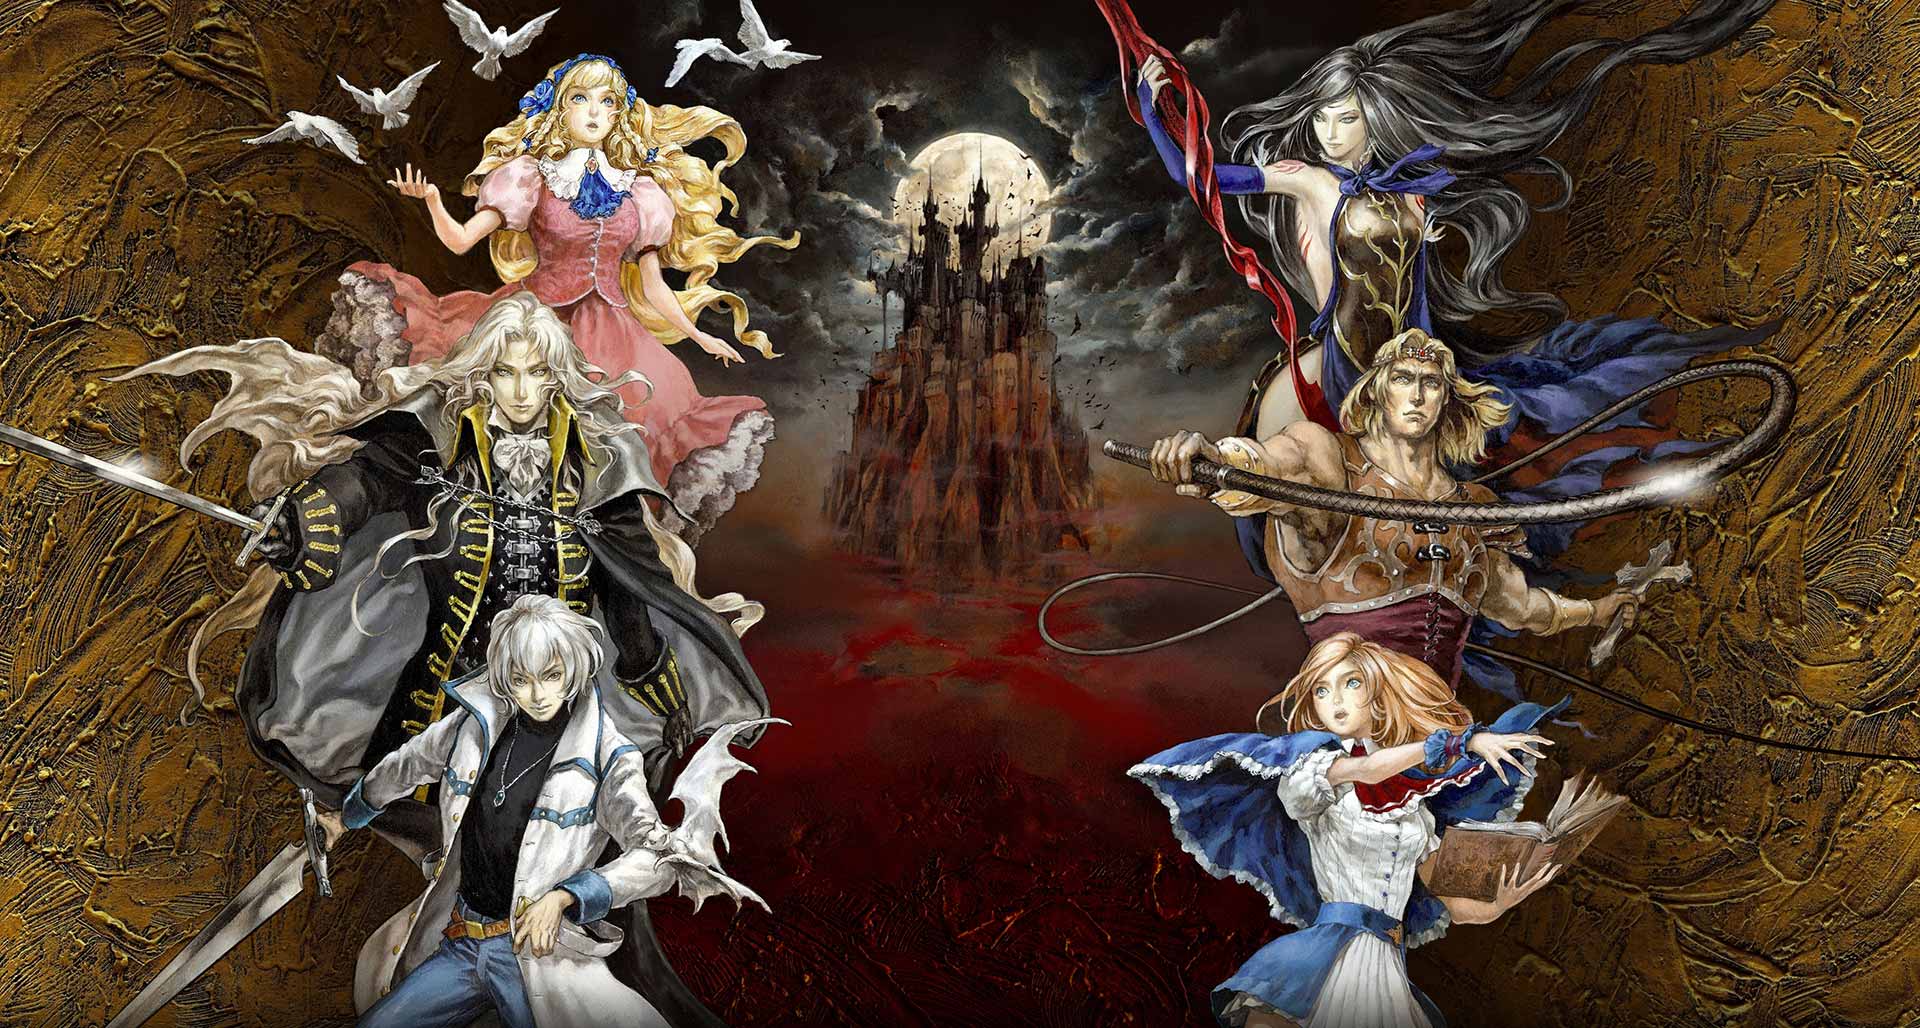 Image for Castlevania: Grimoire of Souls is an iOS action game for Japan